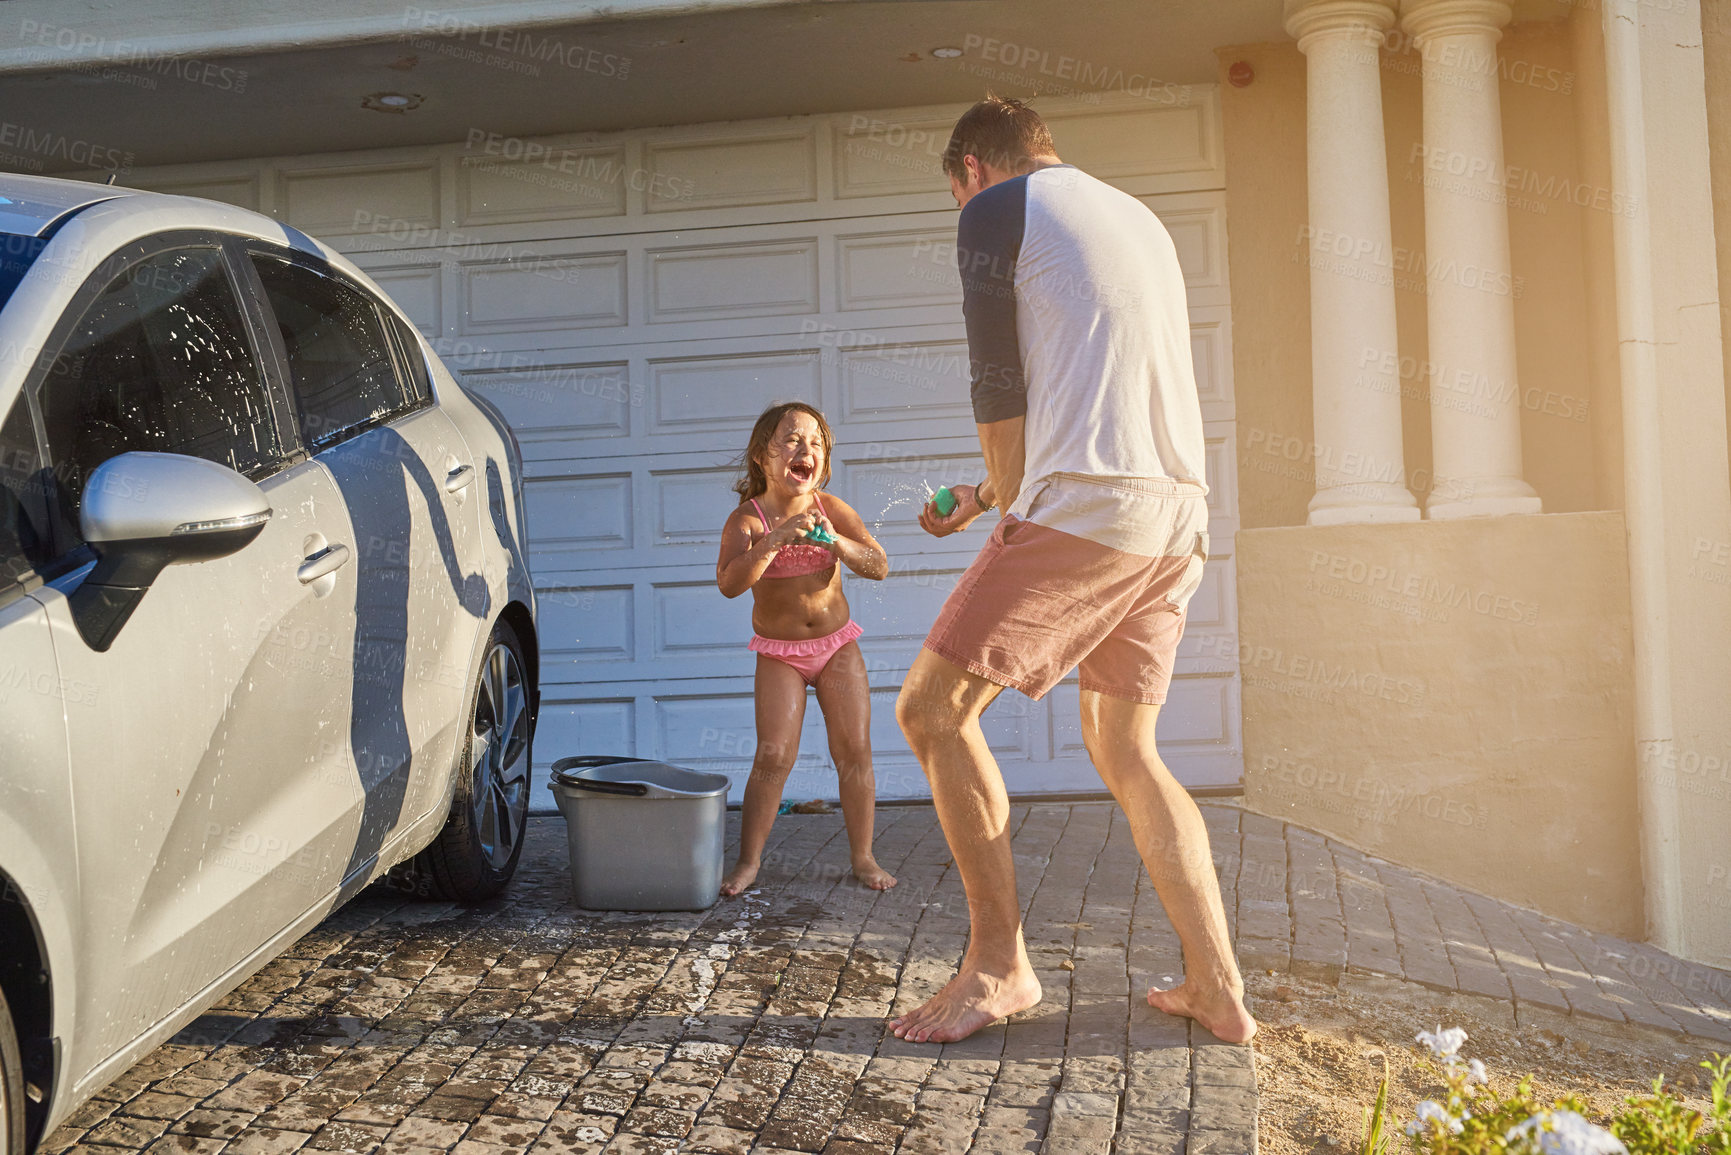 Buy stock photo Shot of a father and daughter having fun while washing a car